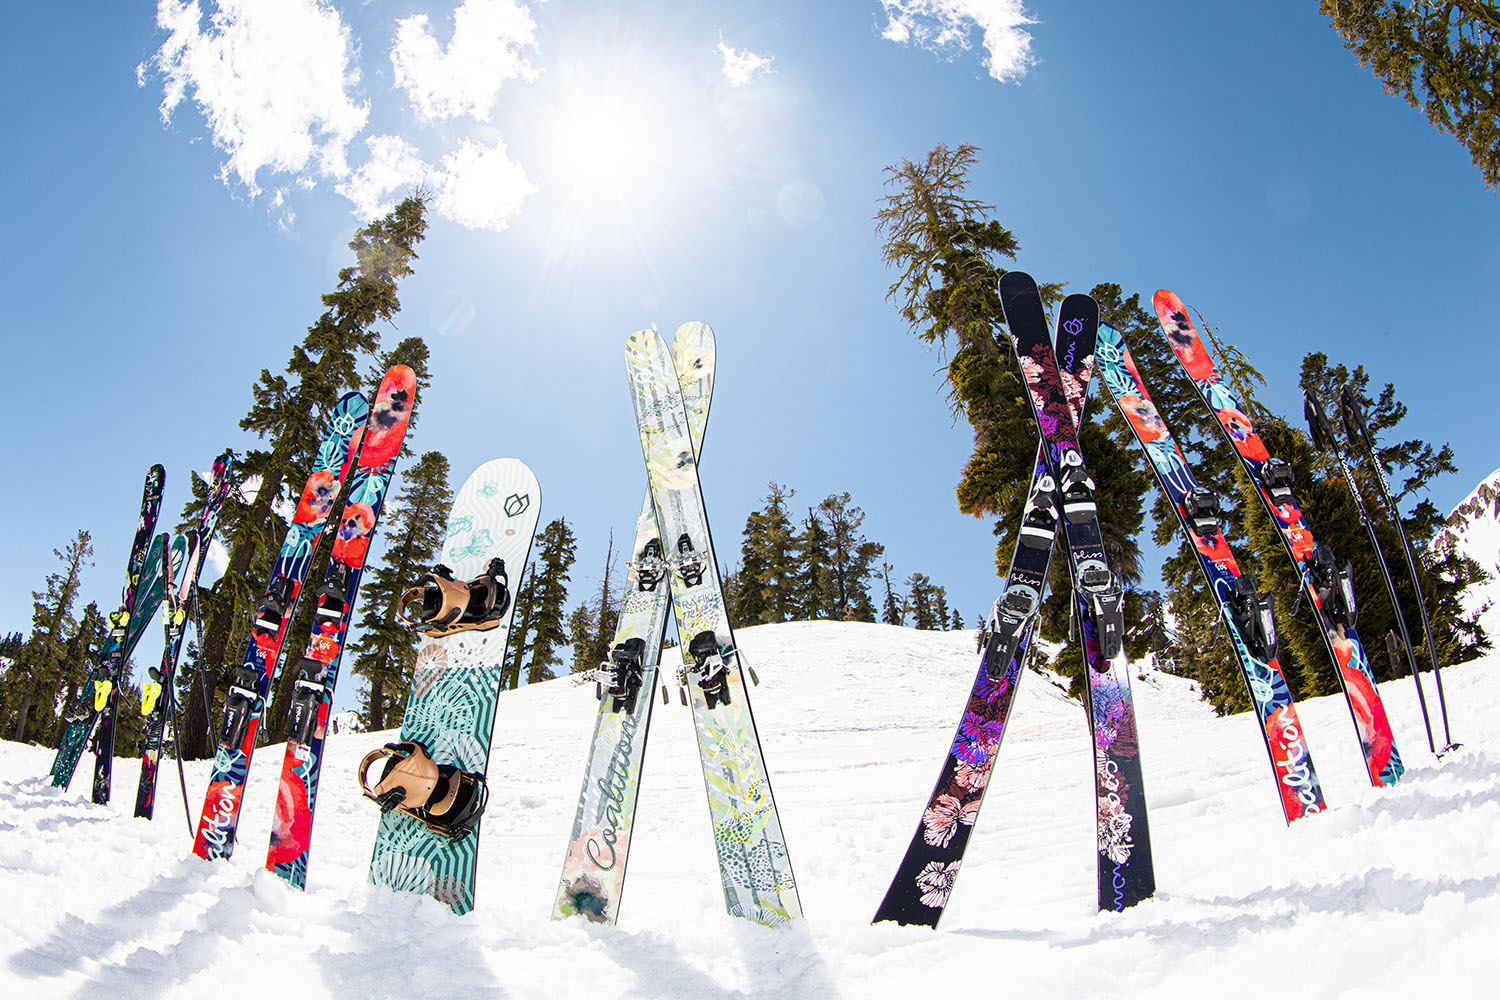 Skis made by women, for just about everyone...